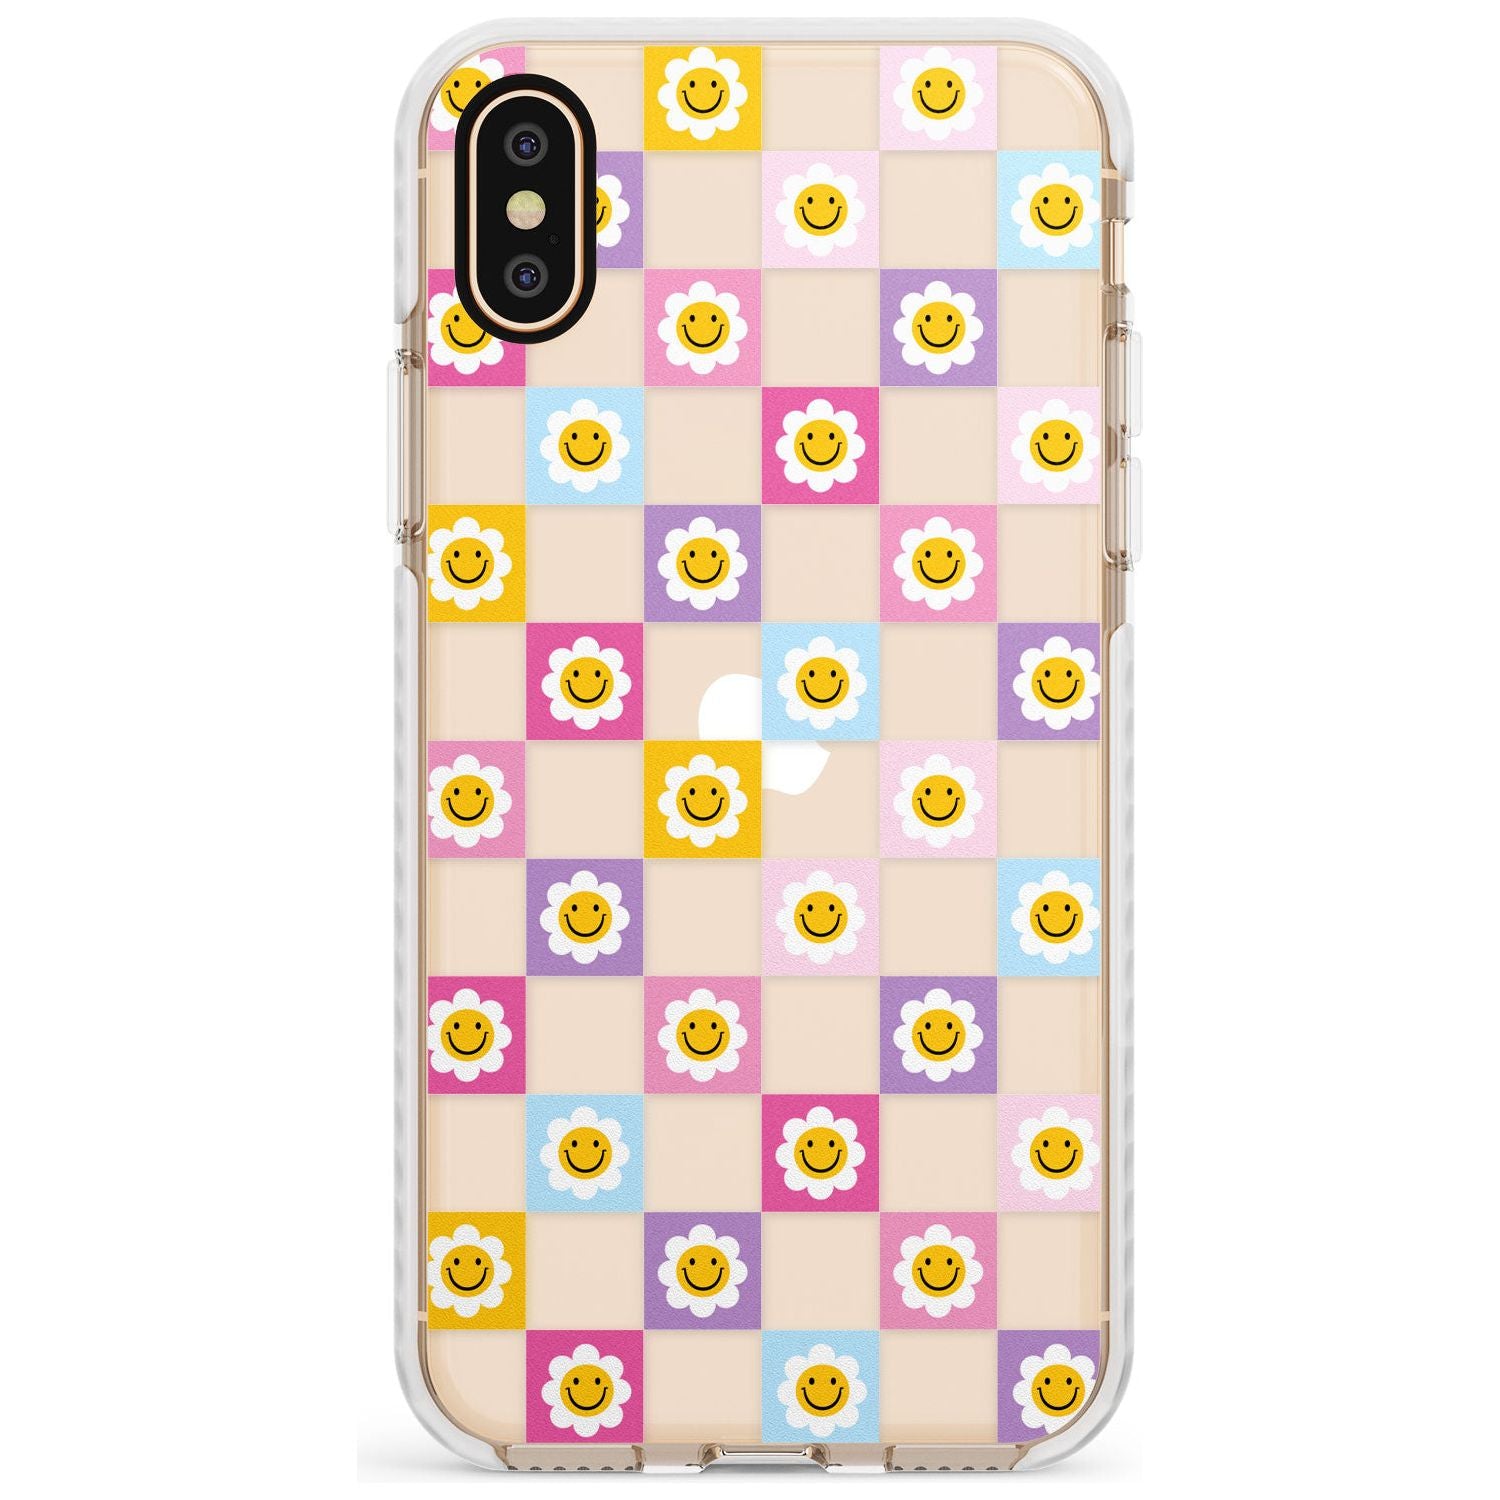 Daisy Squares Pattern Impact Phone Case for iPhone X XS Max XR